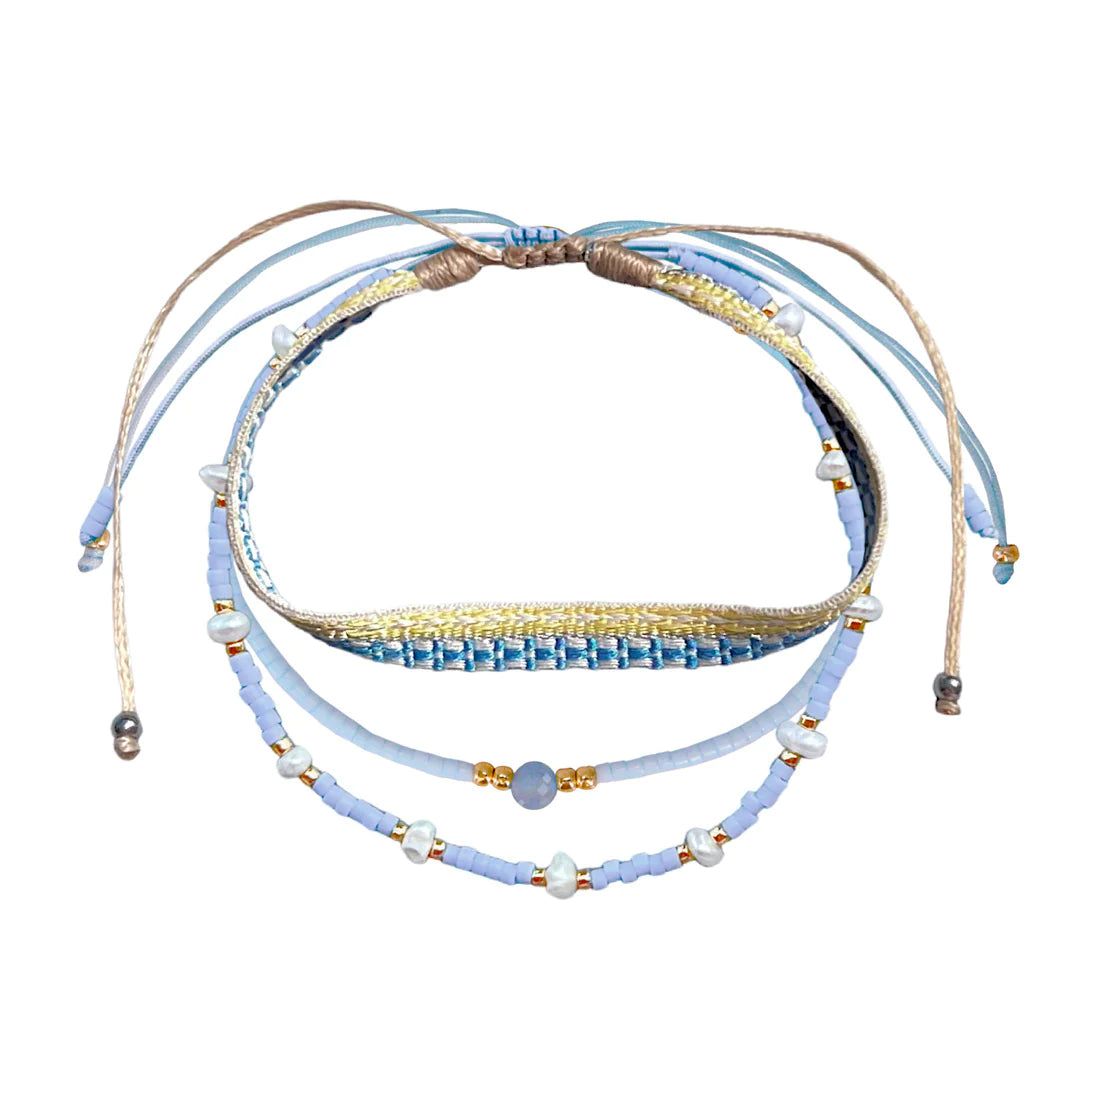 A light sea blue mediterranean bracelet set made of real pearls and stones.